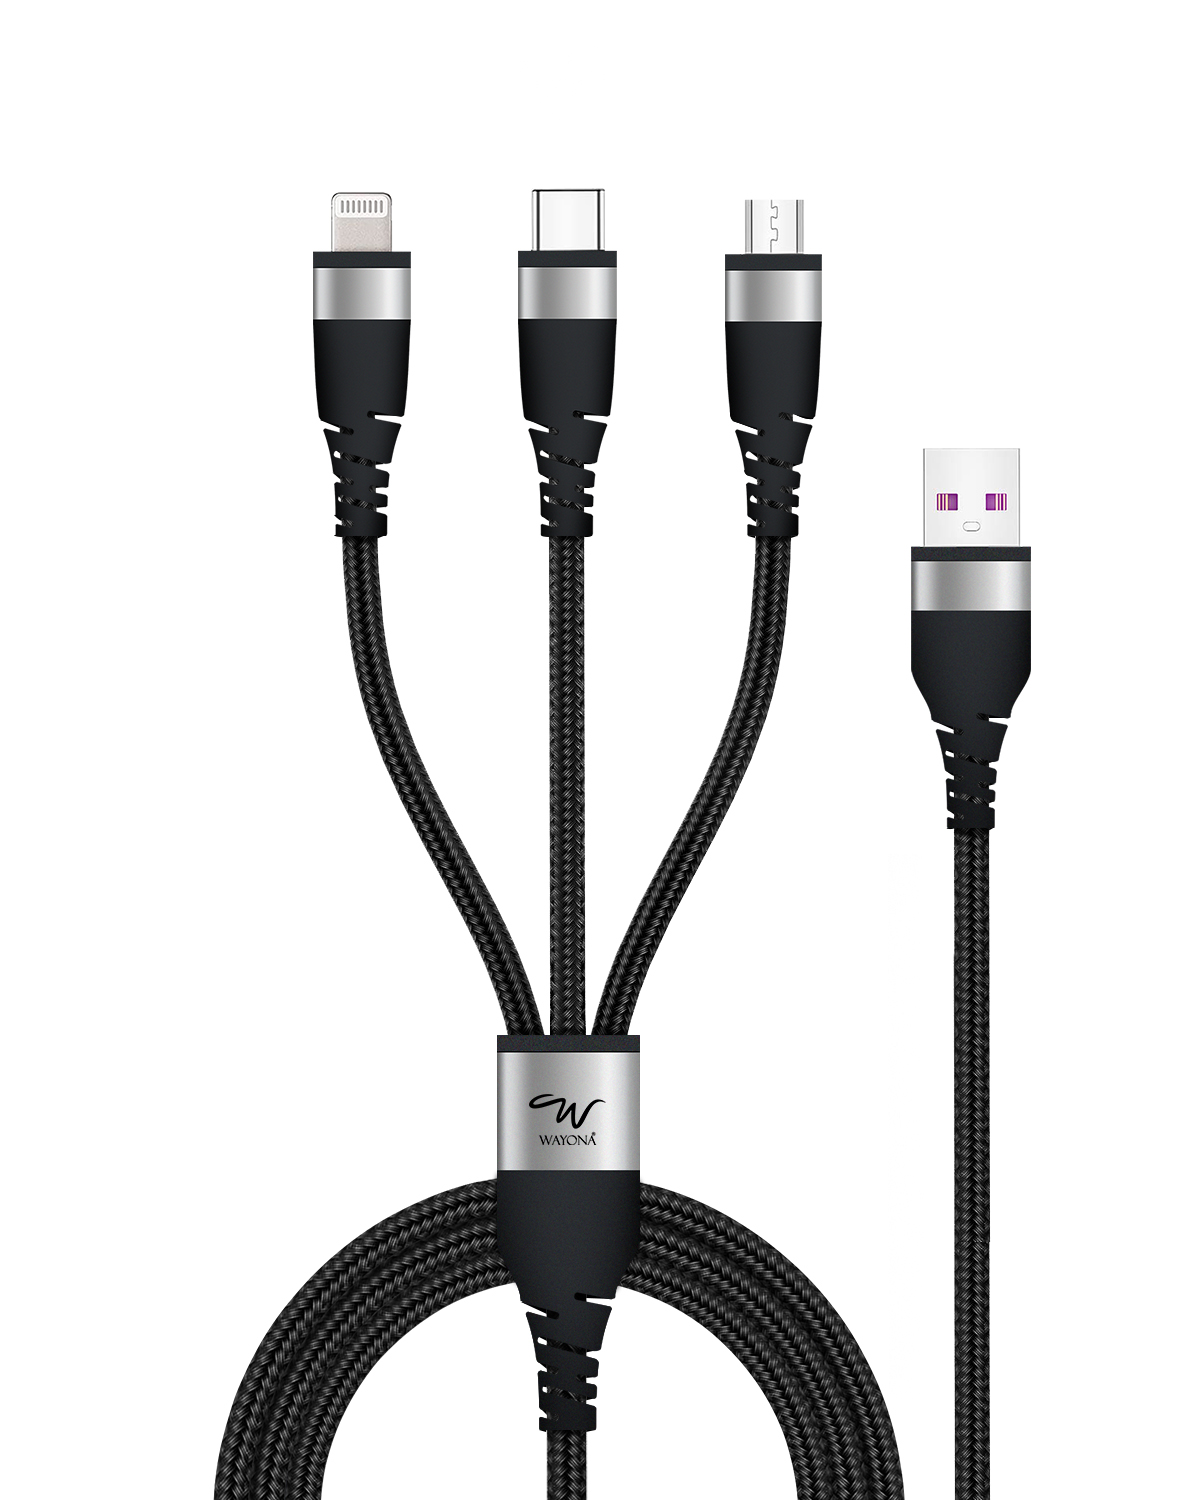 Multi Charging Cable, USB C Cable/iOS/Micro USB Fast Charger 3 in 1 Cord  Connect